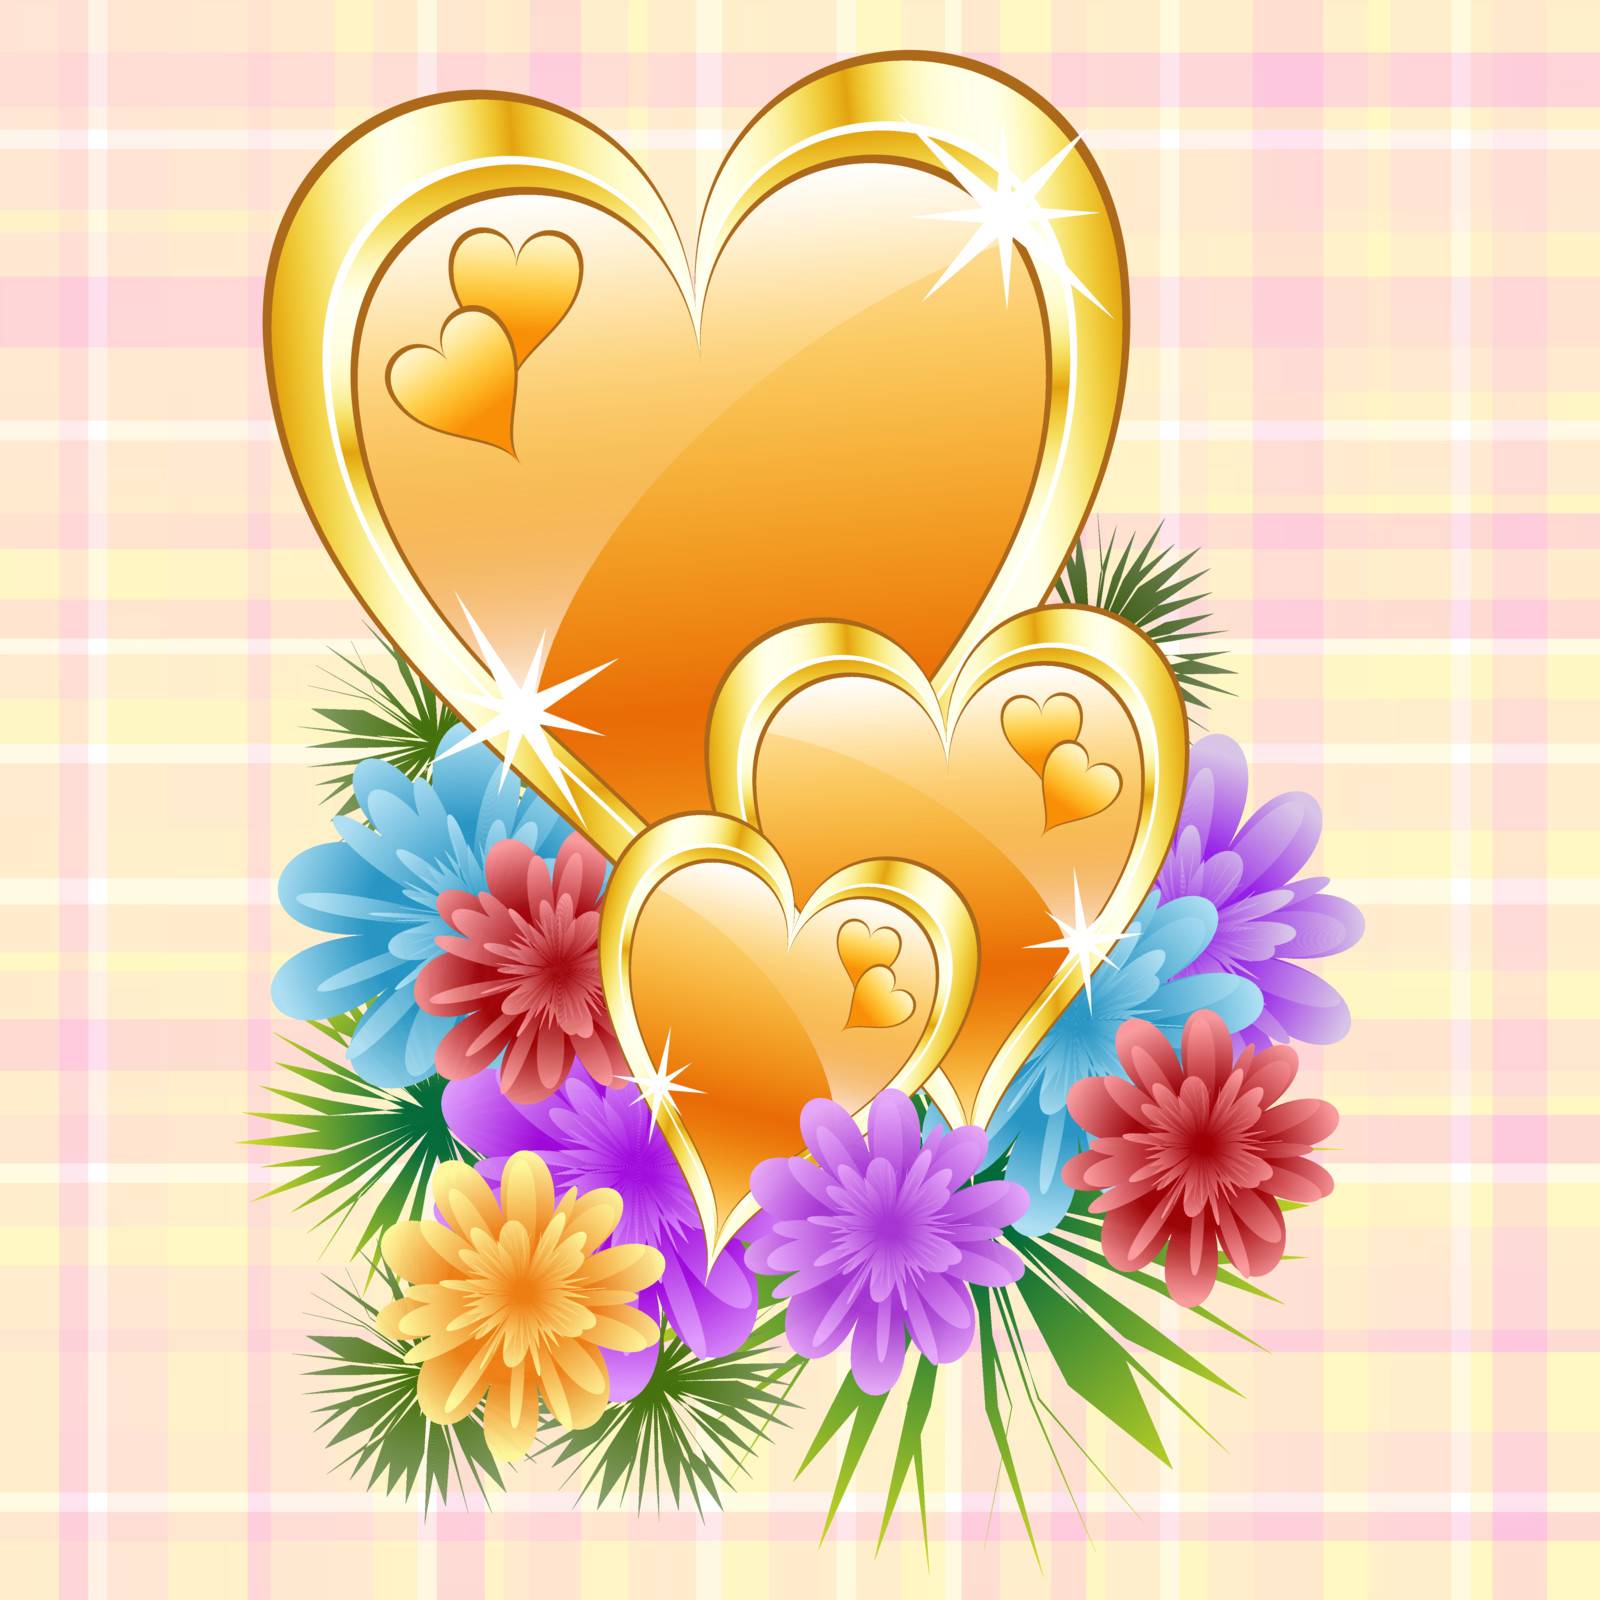 Gold hearts with flowers by toots